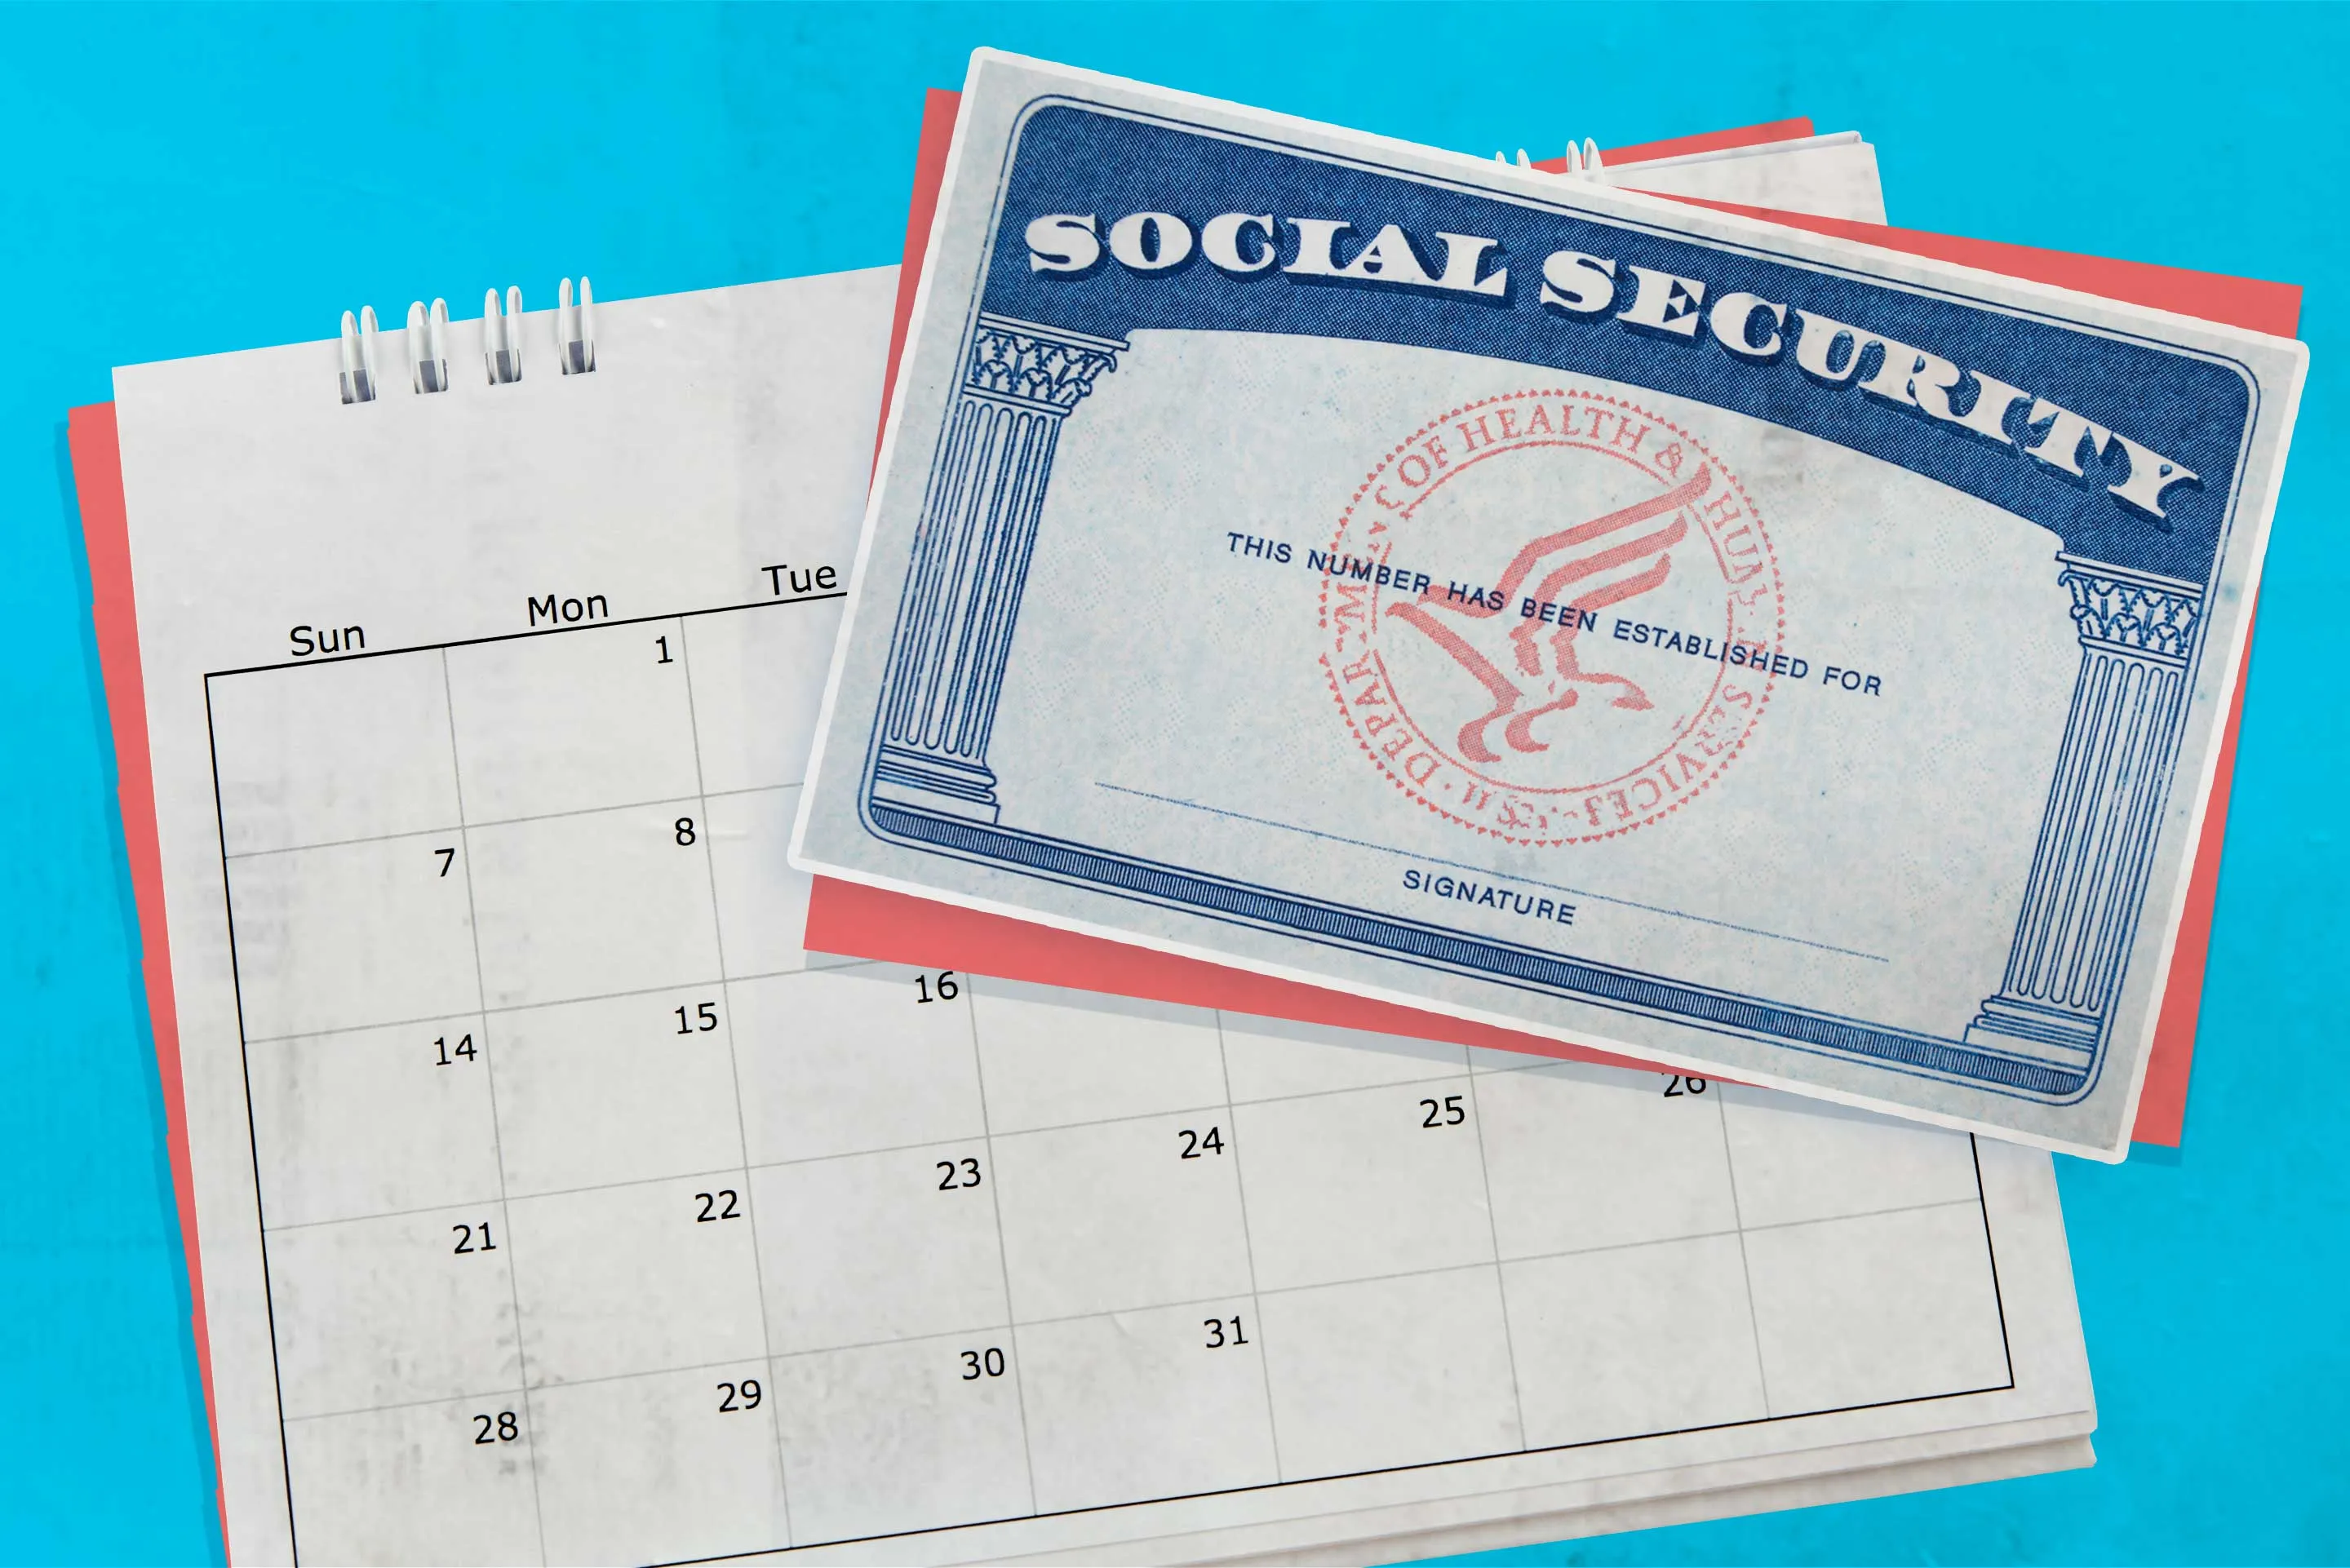 The Year Social Security Will Run Out of Money Just Changed (for the Better)